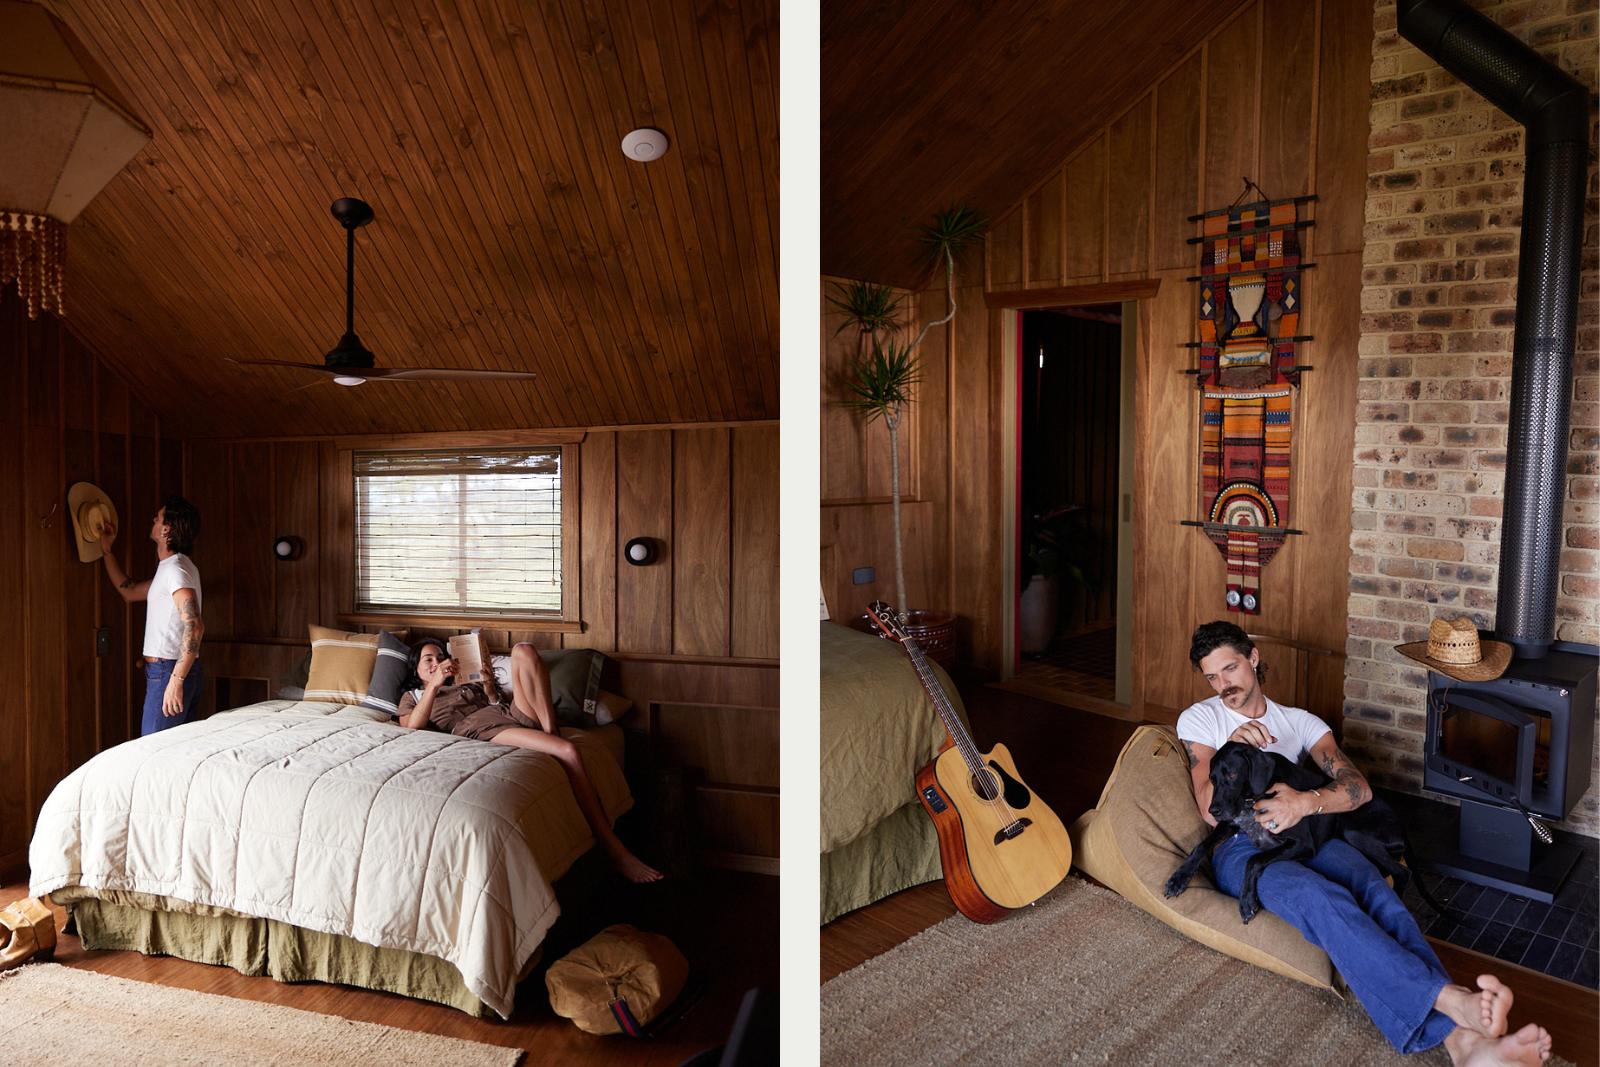 Two images first is woman in twenties reading on bed. Bedroom has dark timber clad walls. Second image is male in his 20's on tan beanbag hugging large black dog. Guitar and fireplace in background